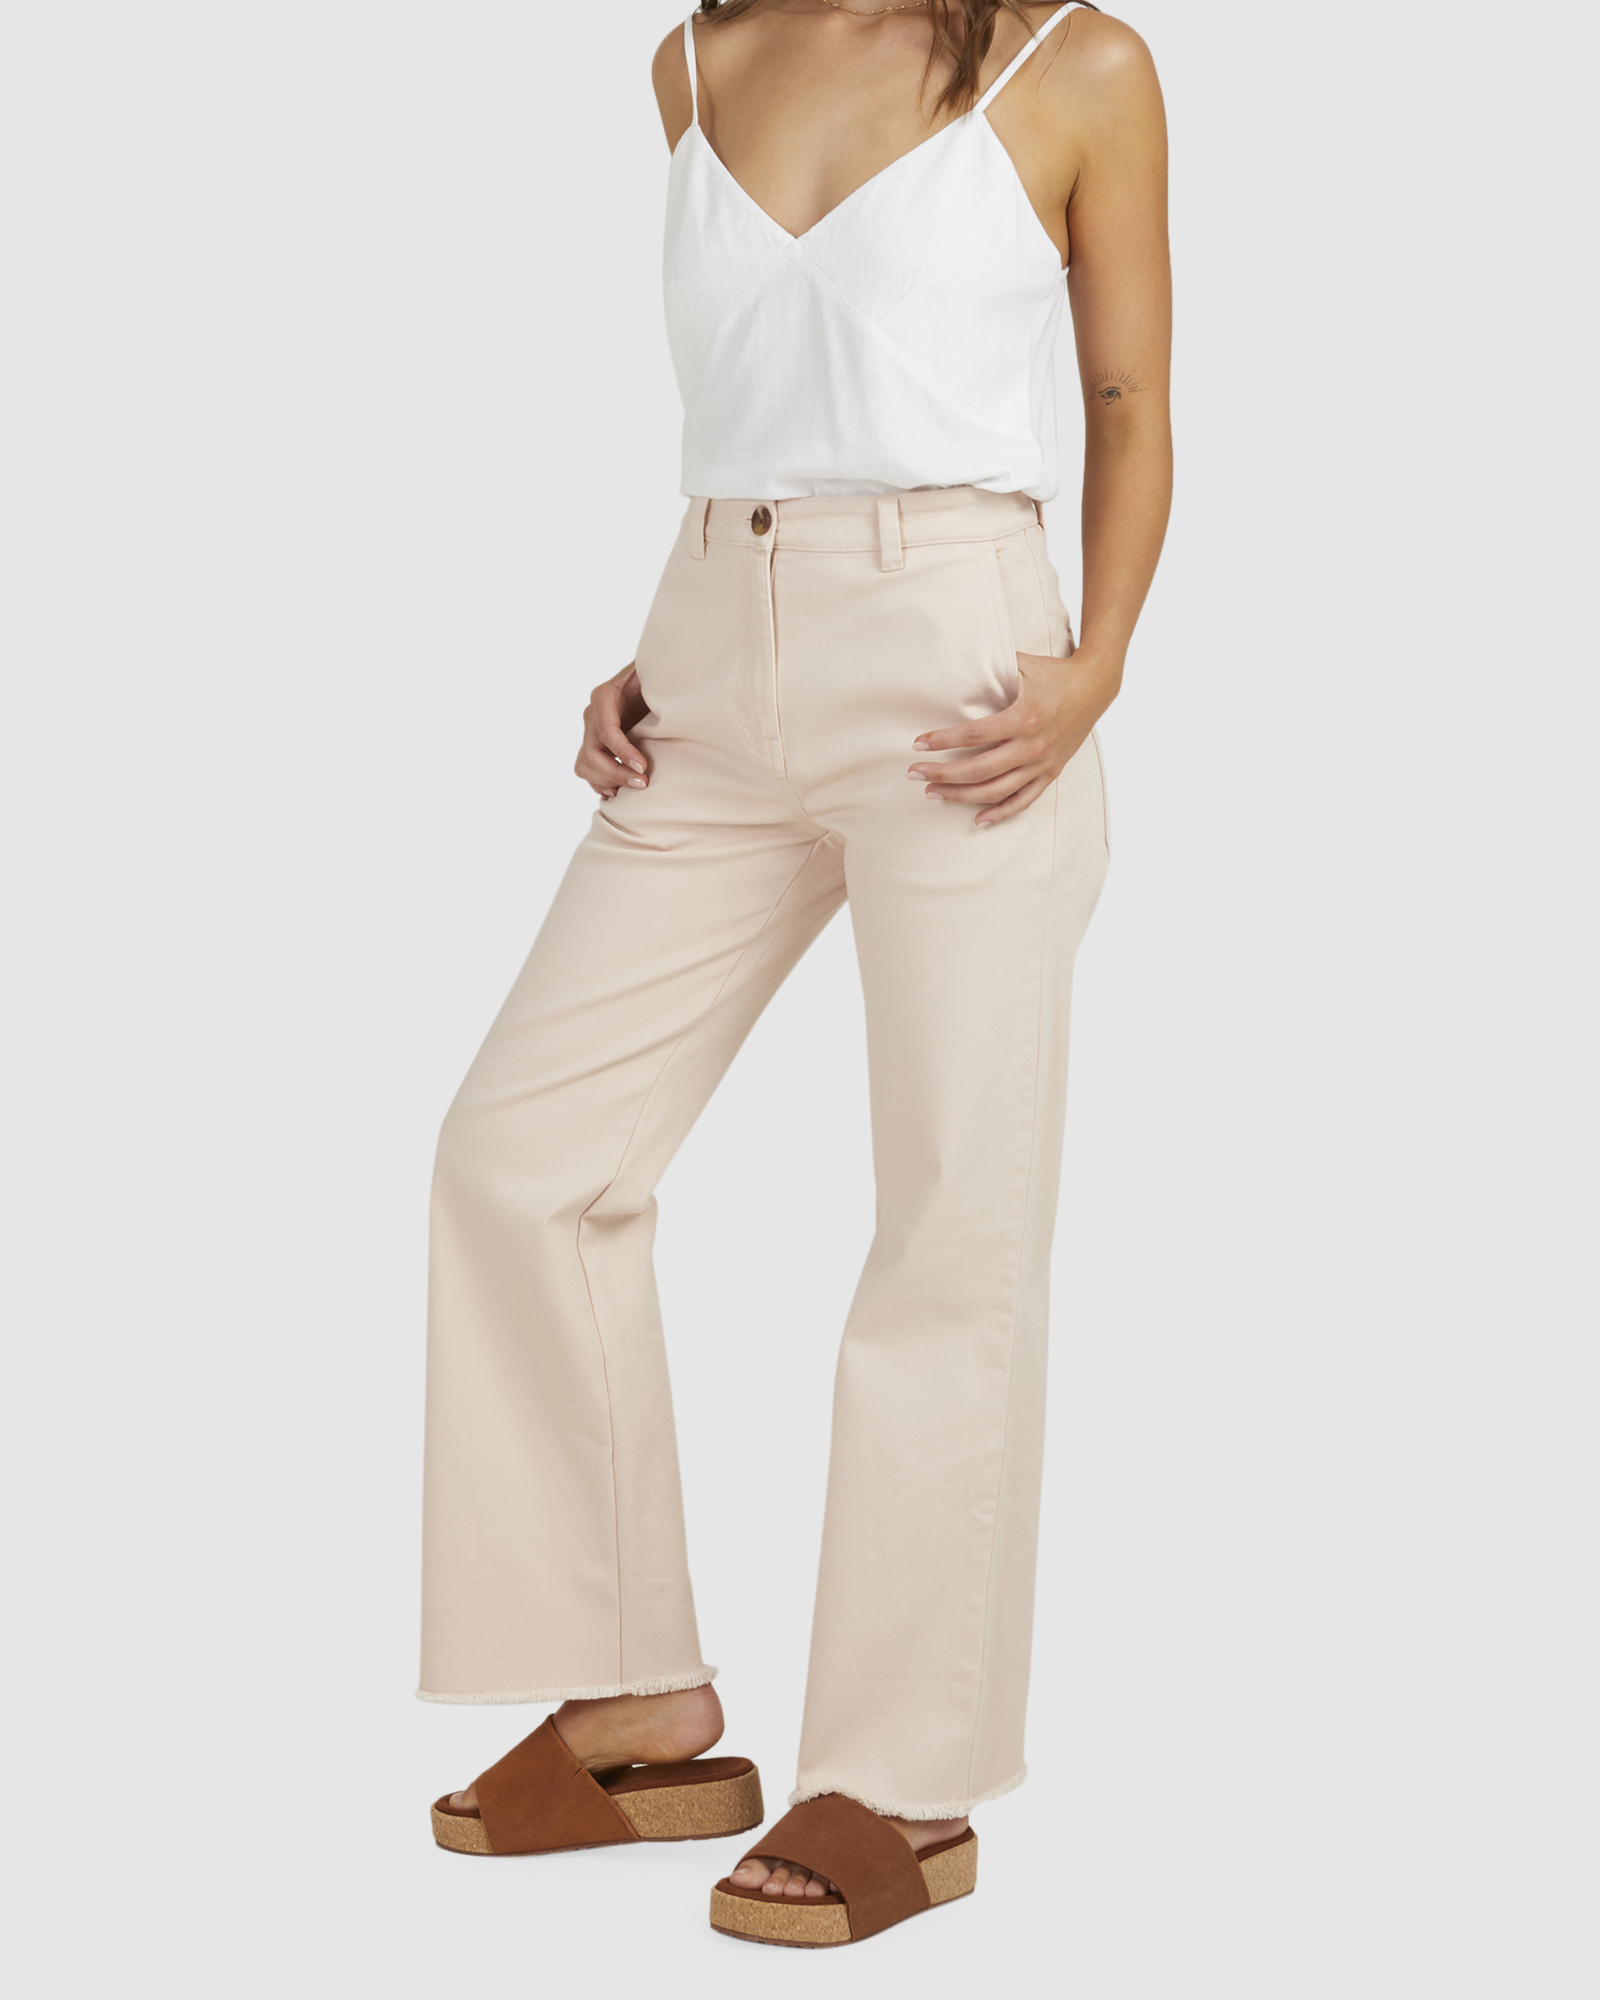 Roxy Womens Barbarella Straight Fit Trousers - Peach Whip